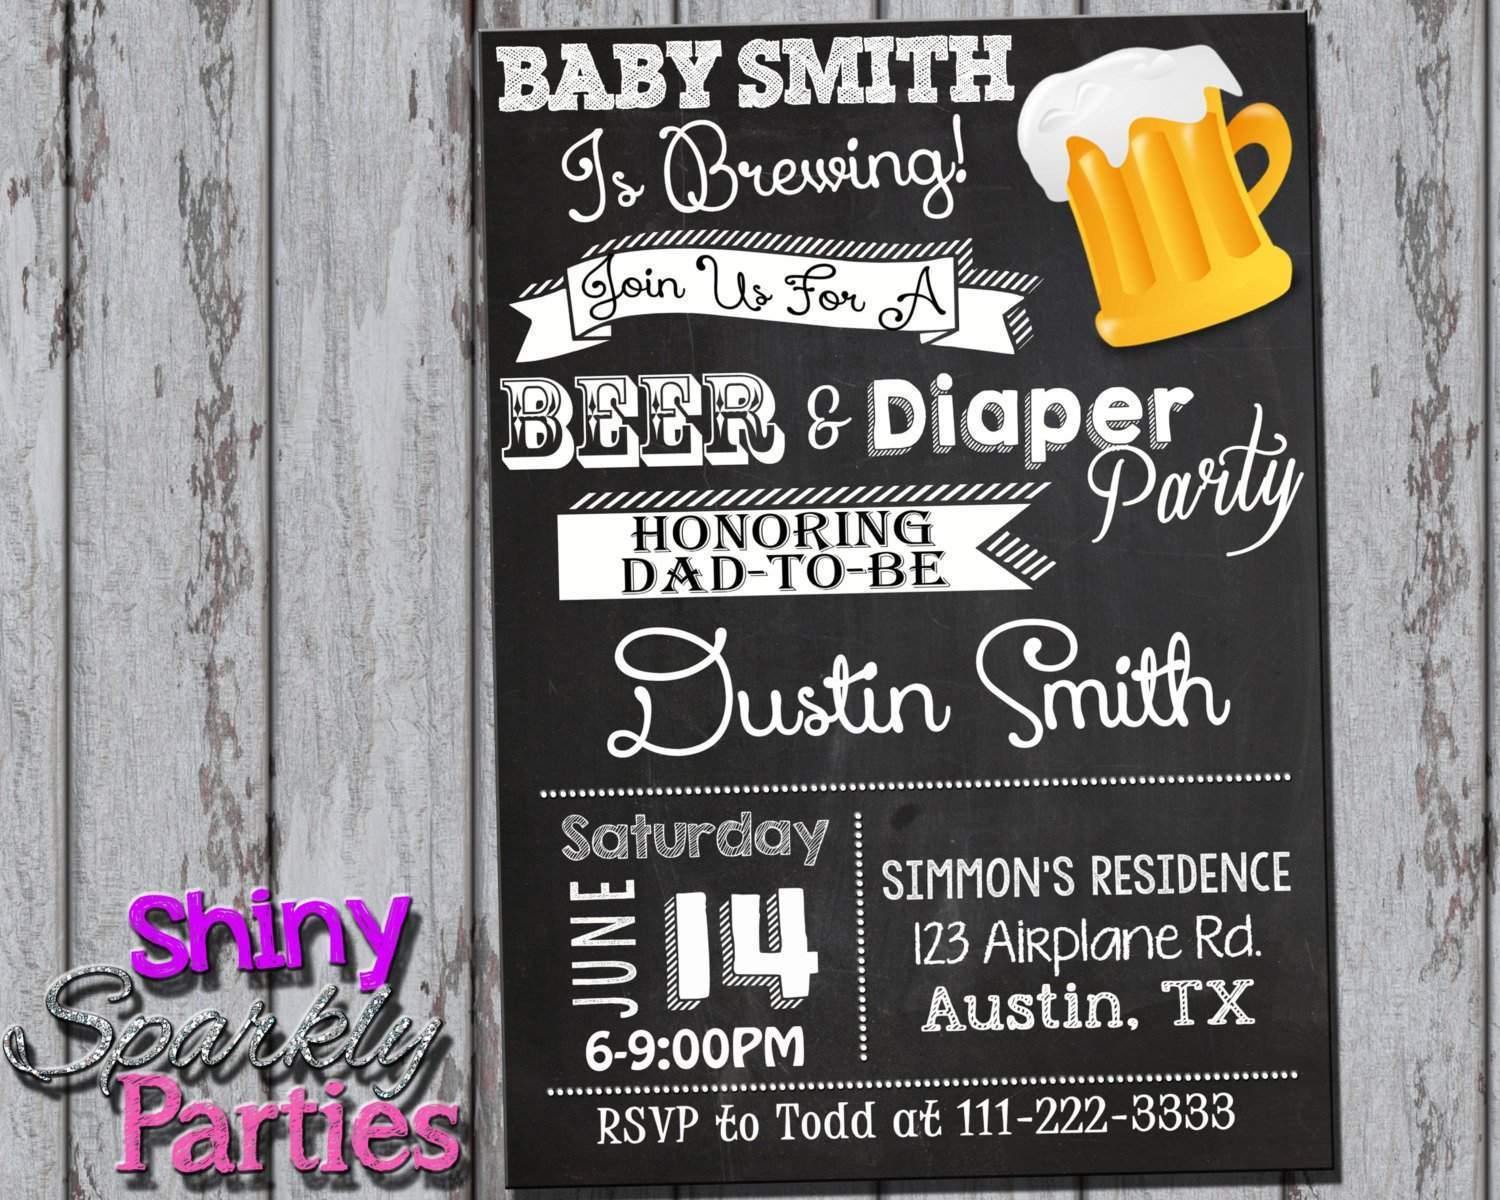 Full Size of Baby Shower:precious Coed Baby Shower Picture Designs Coed Baby Shower Martha Stewart Baby Shower Baby Shower De Baby Shower Ideas Baby Shower Tableware A Baby Shower Bebe Baby Shower